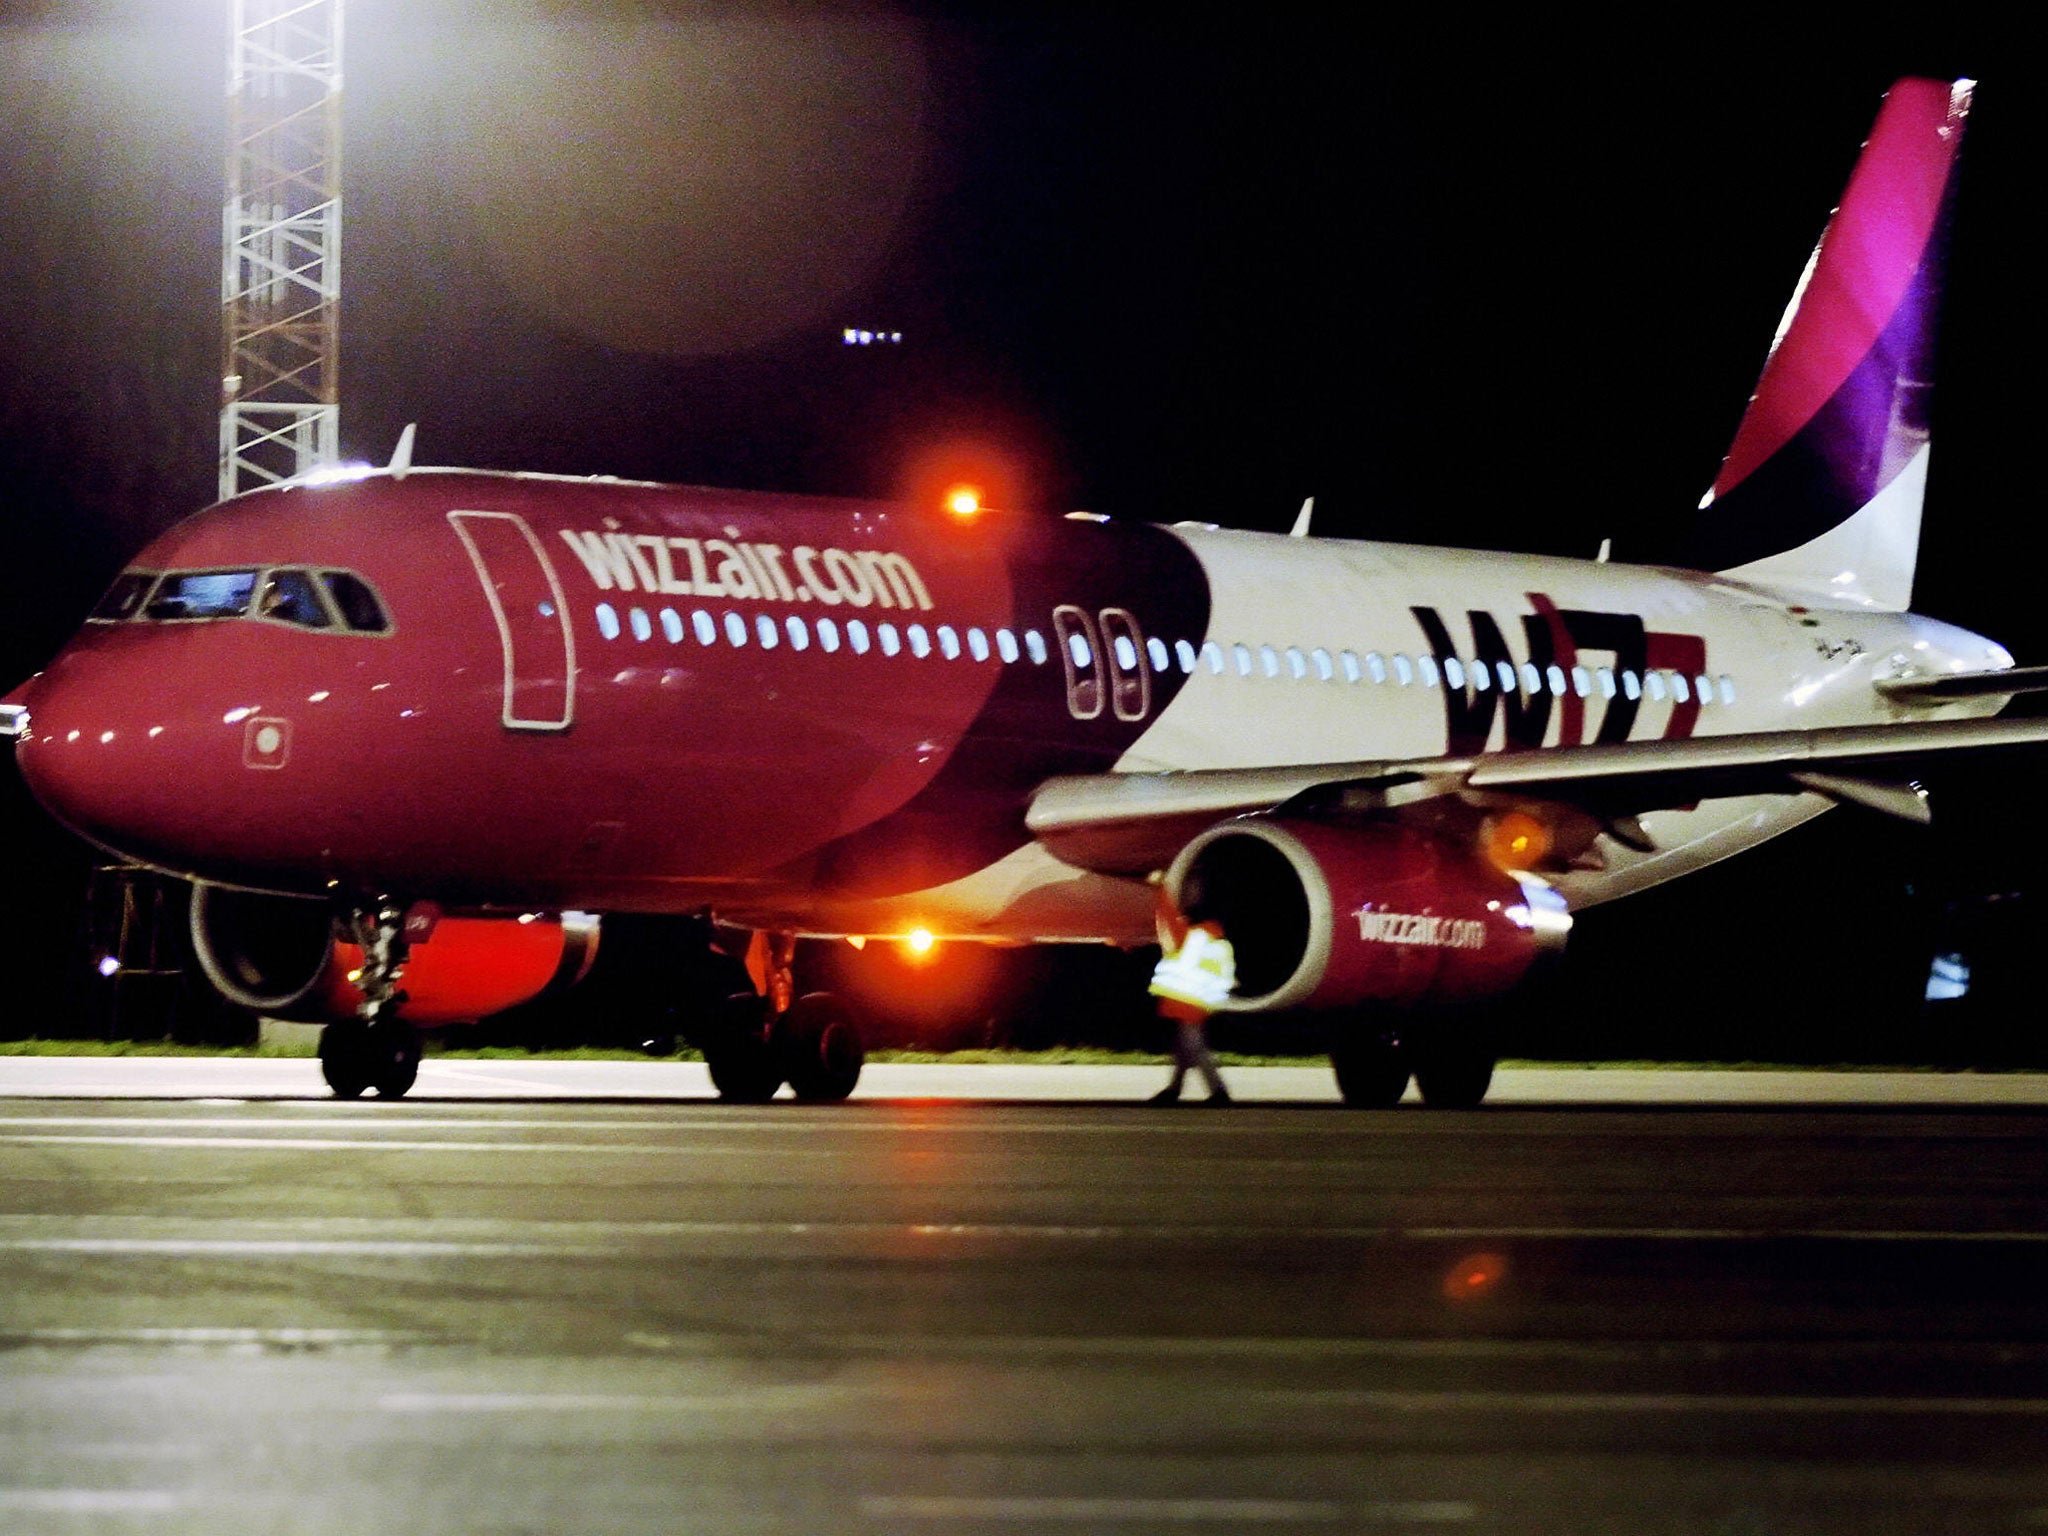 A Wizz Air plane was involved in the incident